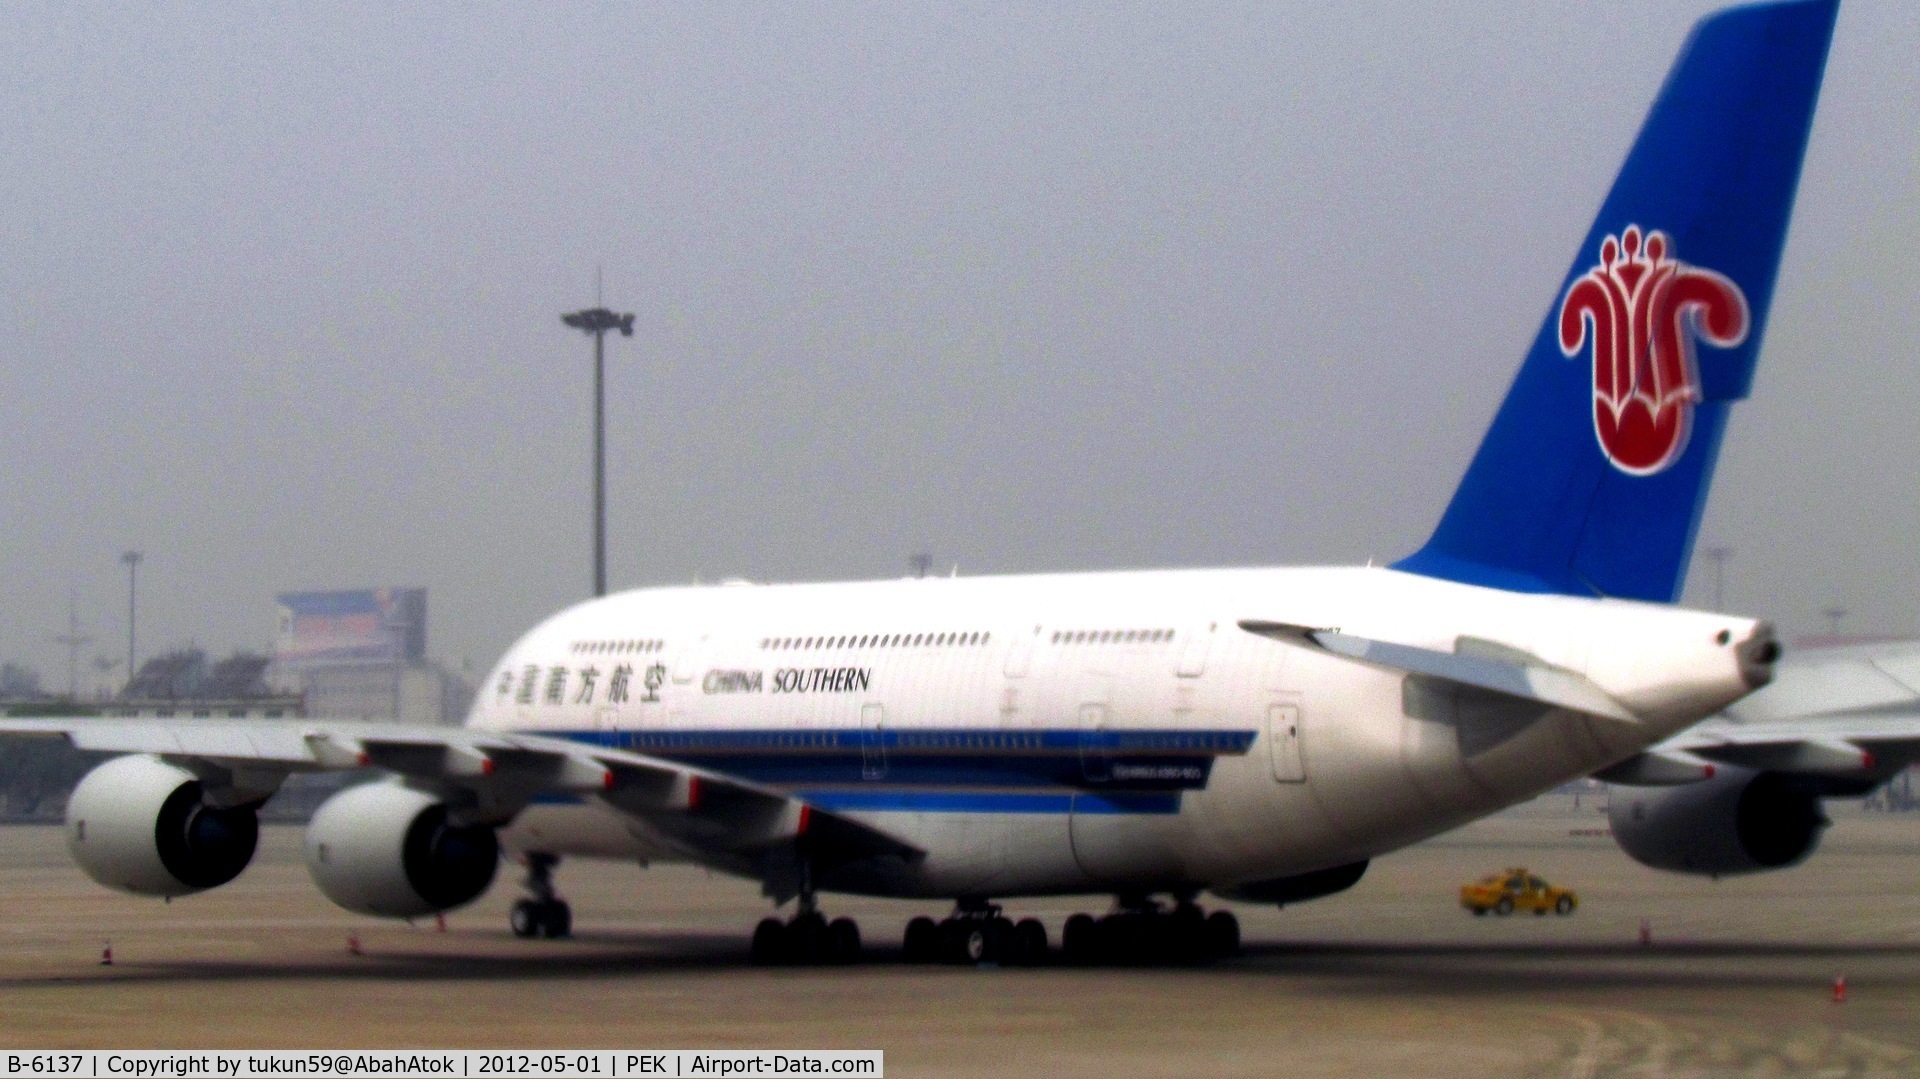 B-6137, 2011 Airbus A380-841 C/N 036, China Southern Airlines